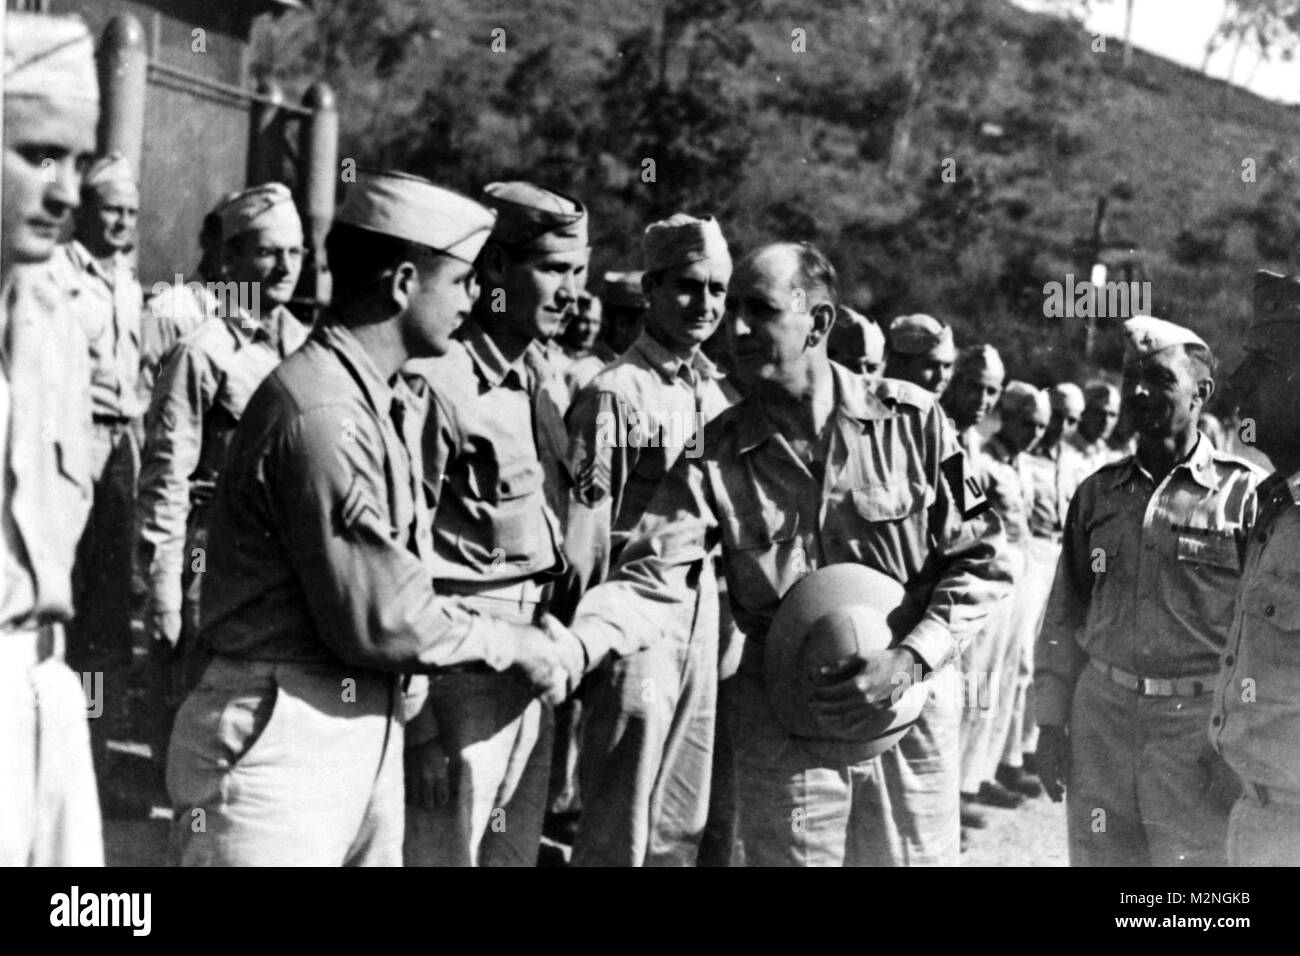 PORT MORESBY, New Guinea, September 10, 1943 – Senator Richard Russell of Georgia shakes hand with Cpl. Ellis Page of the 101st AAA Separate Battalion during his tour of inspection. To the right is Major S. W. Griffin, commander of the 101st AAA, and a future Adjutant General and Governor of Georgia. Photo 231963, National Archives Records Administration (NARA), College Park, Md. Future TAG in Papau by Georgia National Guard Stock Photo